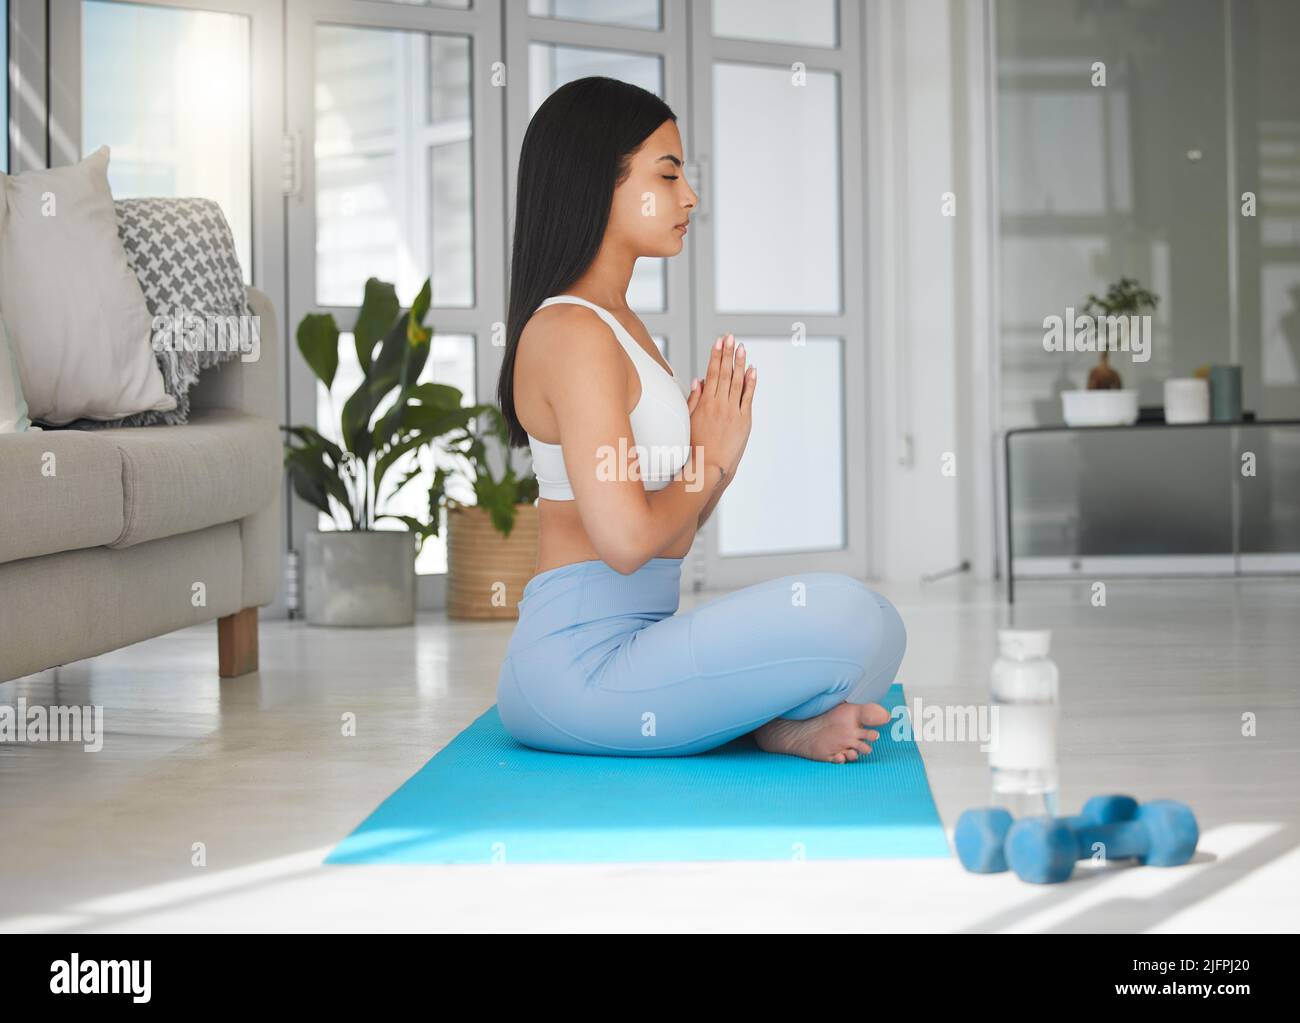 Meditate with mindful breathing. Shot of a sporty young woman meditating while practising yoga at home. Stock Photo